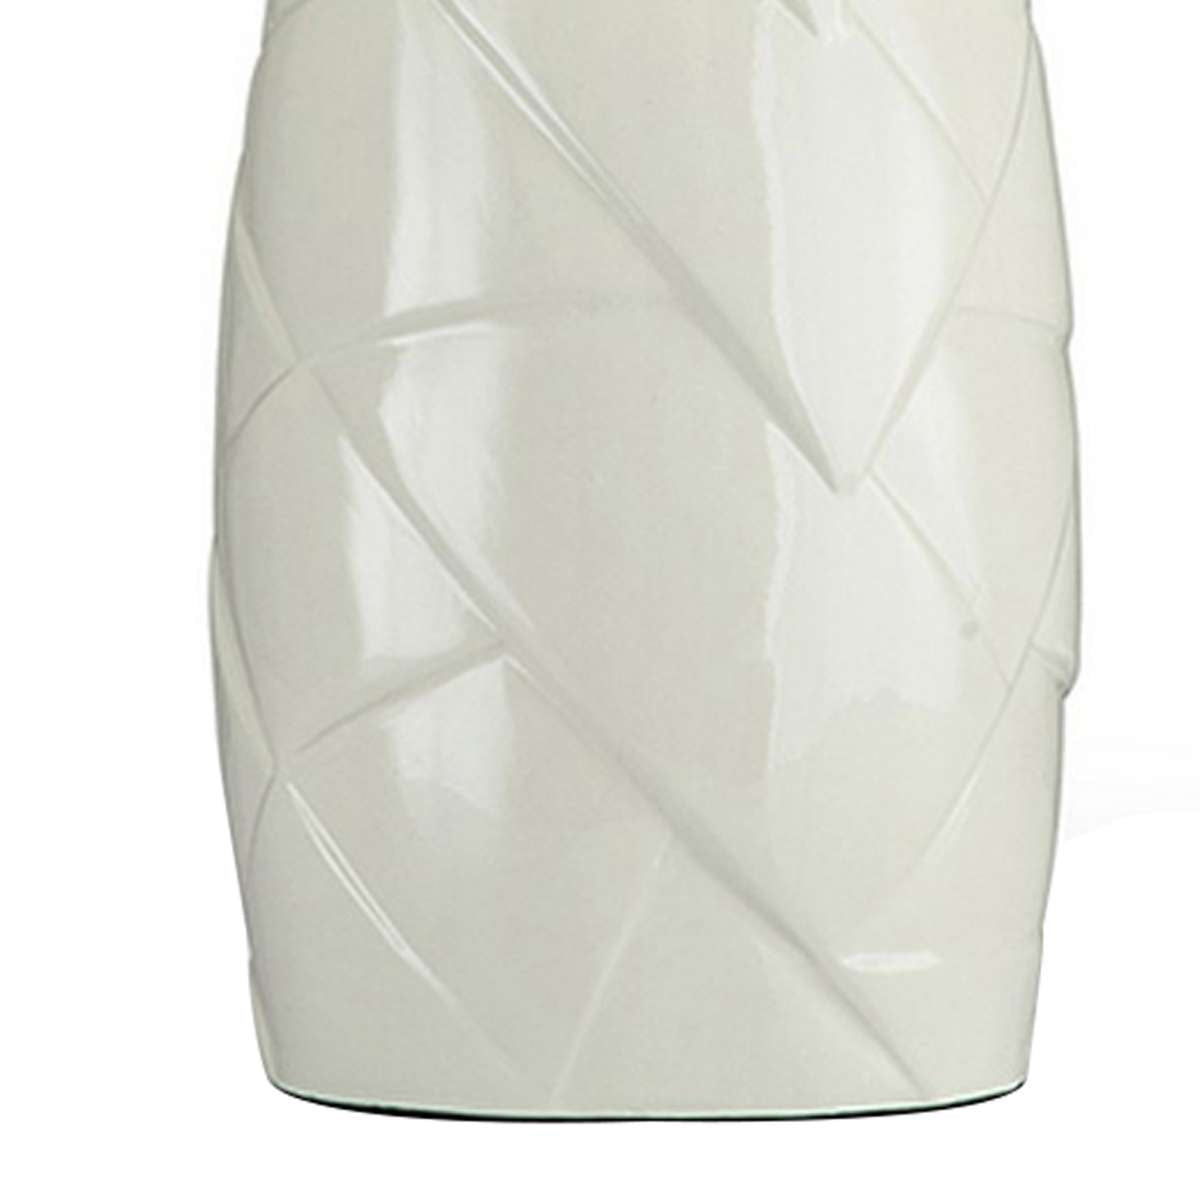 Table Lamp With Ceramic Body And 3D Geometric Design, White By Benzara